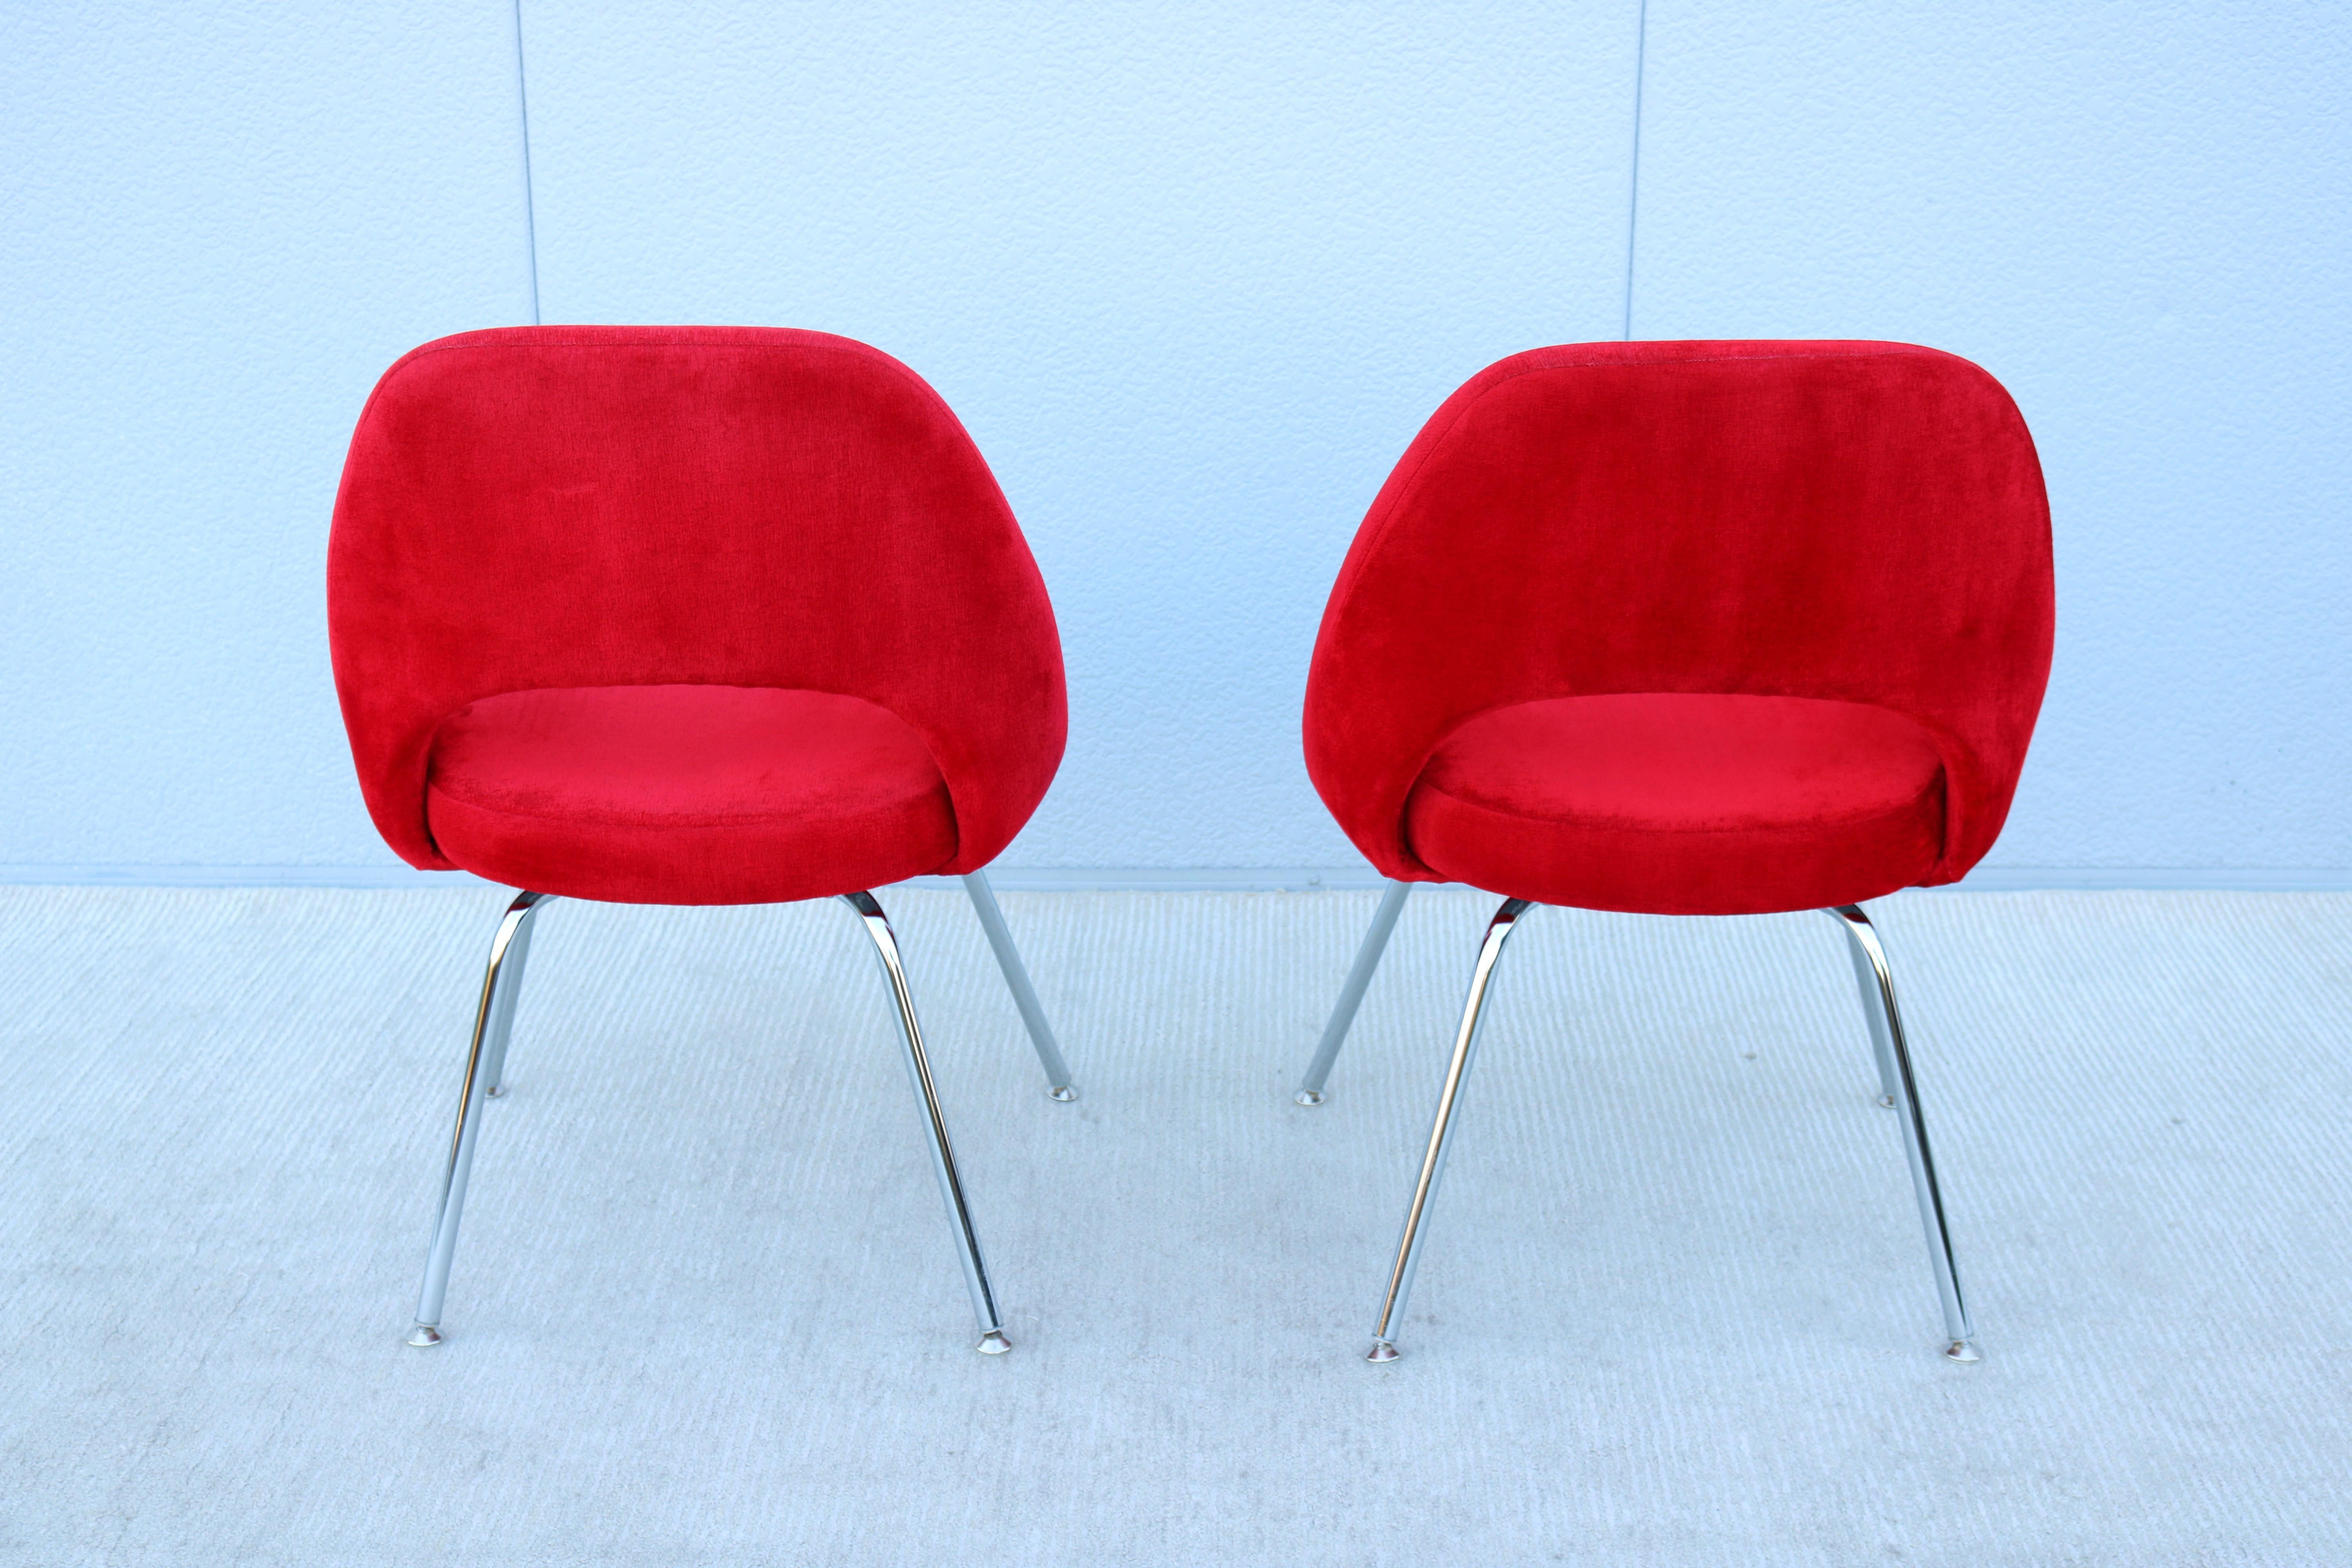 Mid-Century Modern Eero Saarinen for Knoll Red Executive Armless Chairs - a Pair For Sale 4